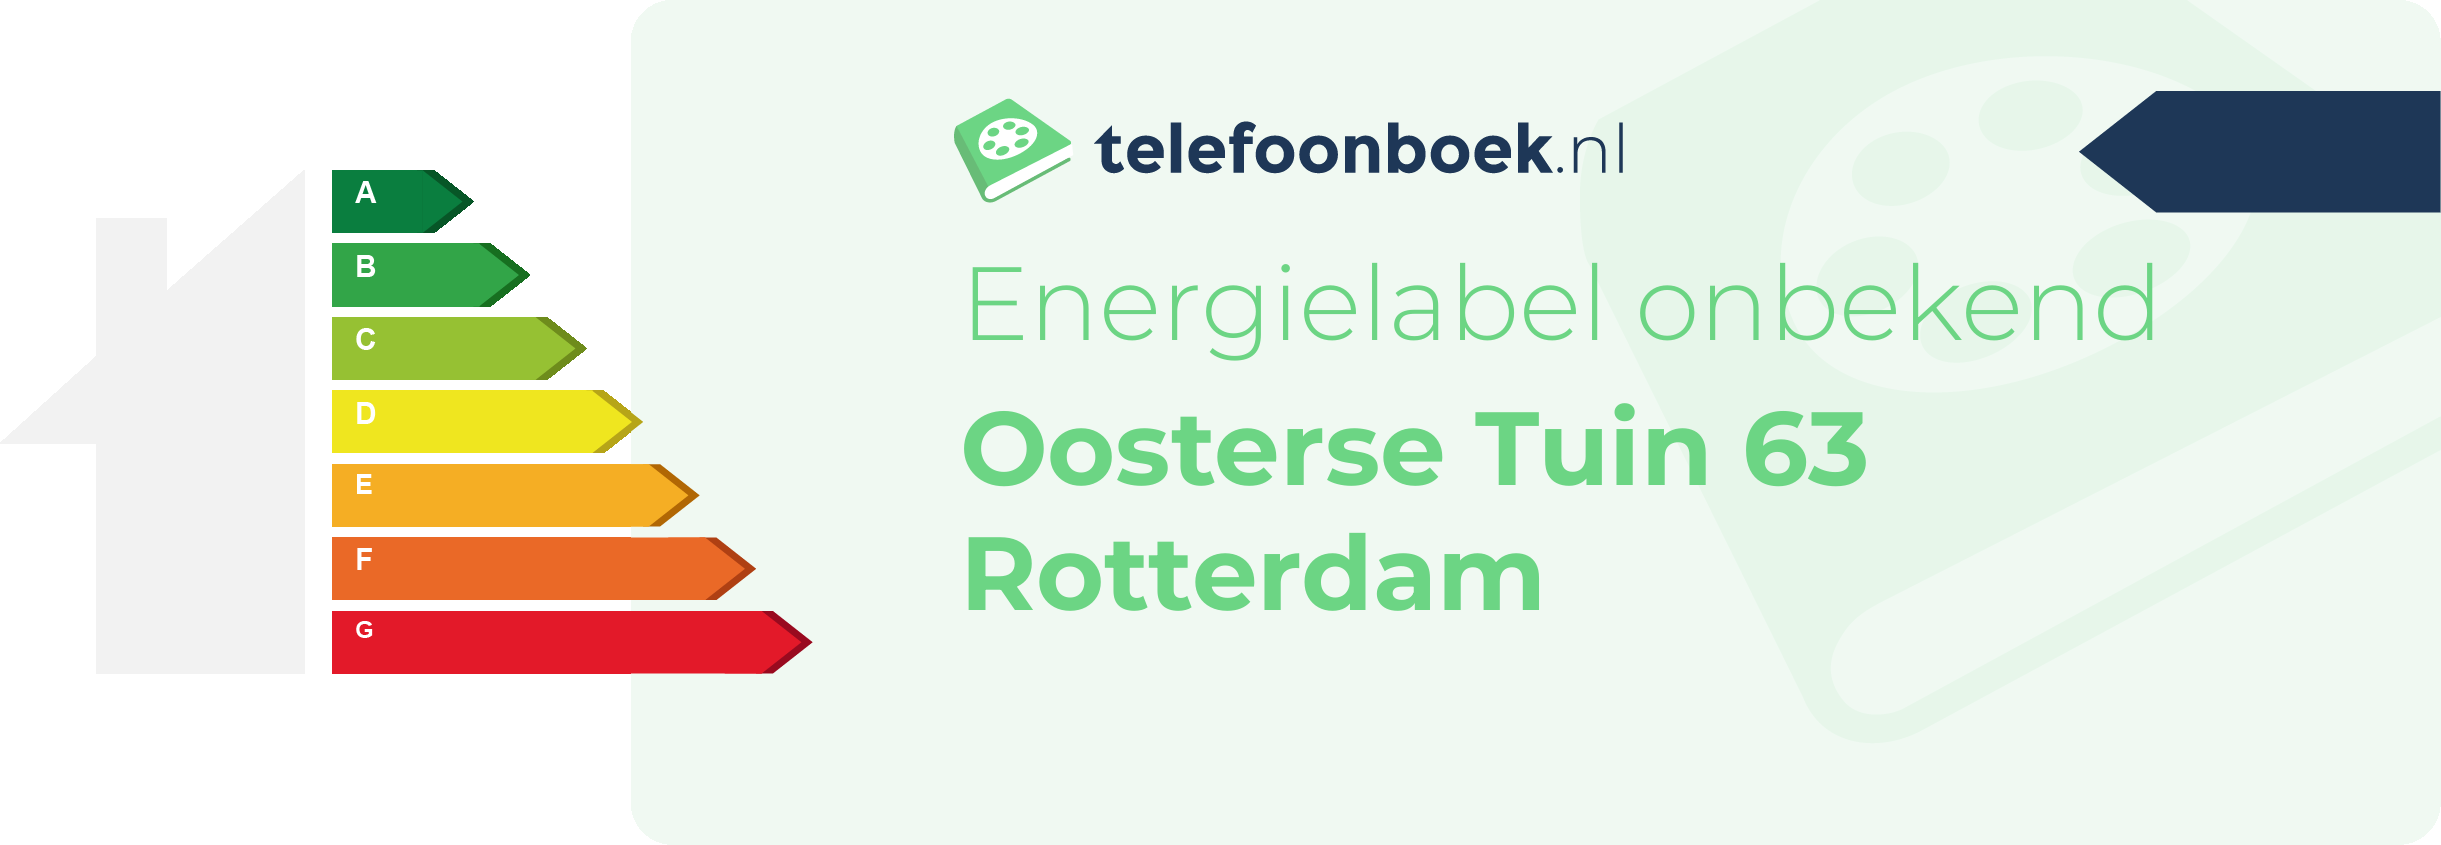 Energielabel Oosterse Tuin 63 Rotterdam